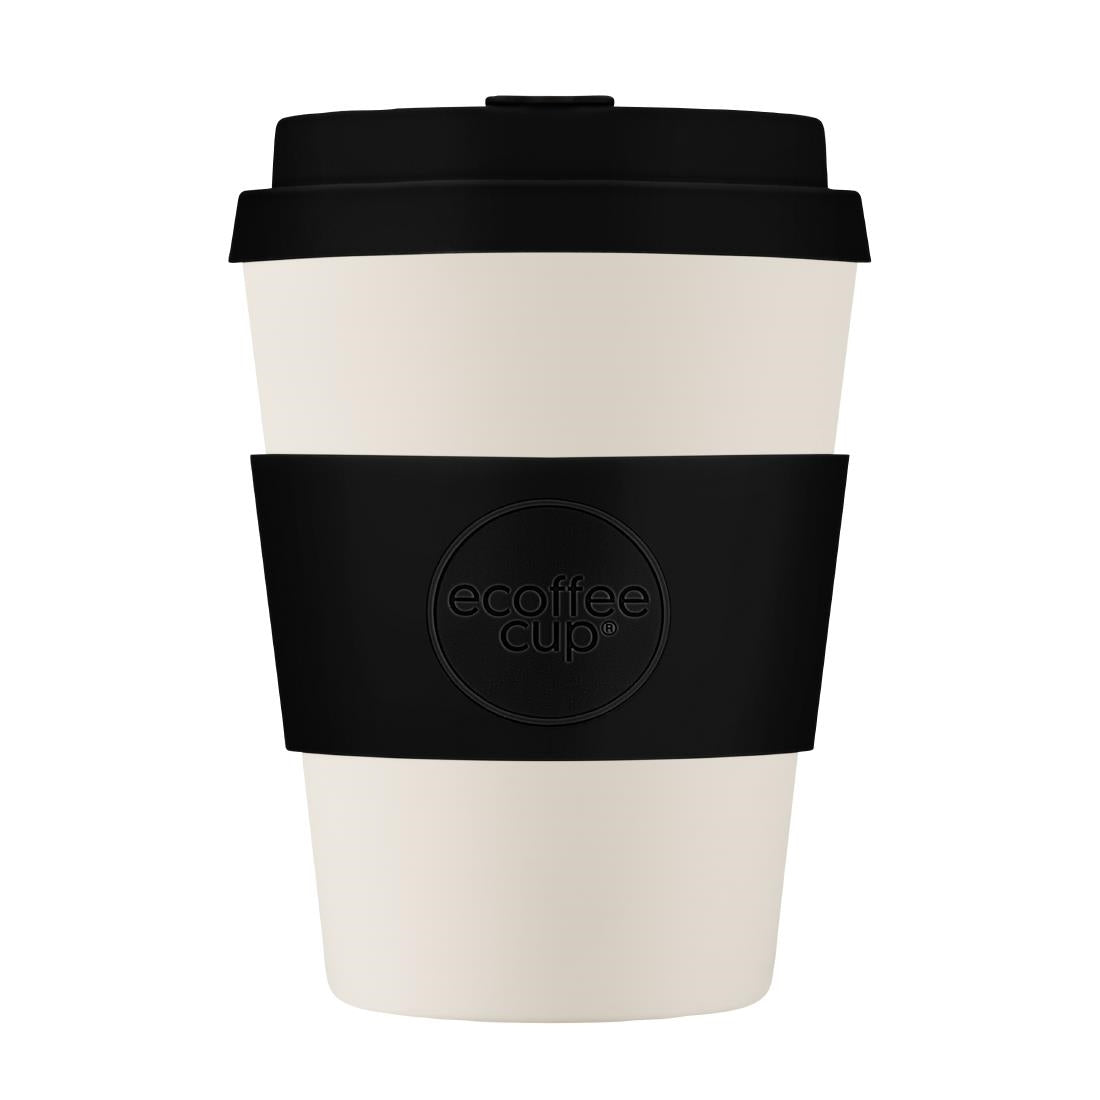 CU491 ecoffee cup Reusable Coffee Cup Black Nature Black/White 12oz JD Catering Equipment Solutions Ltd